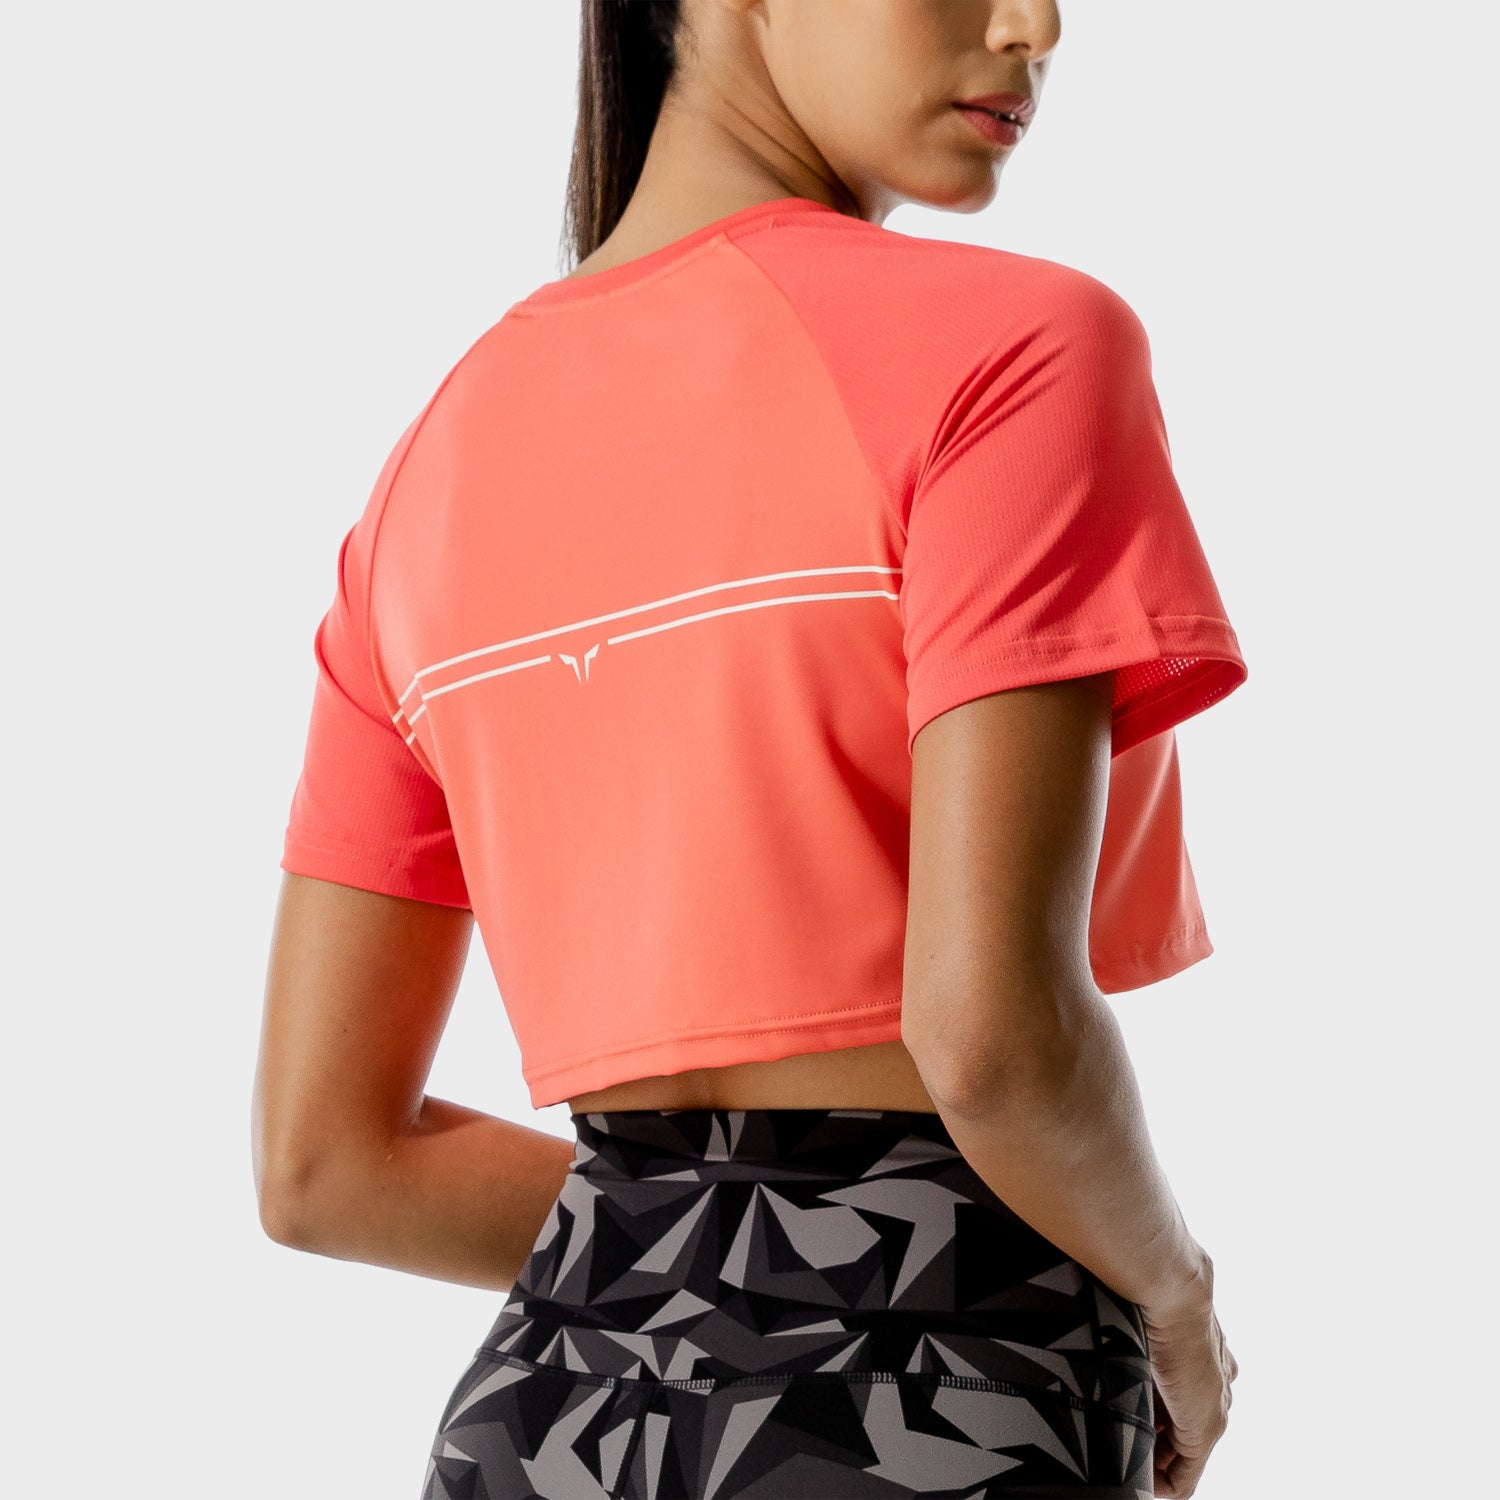 squatwolf-gym-t-shirts-for-women-lab-360-crop-tee-hot-coral-workout-clothes